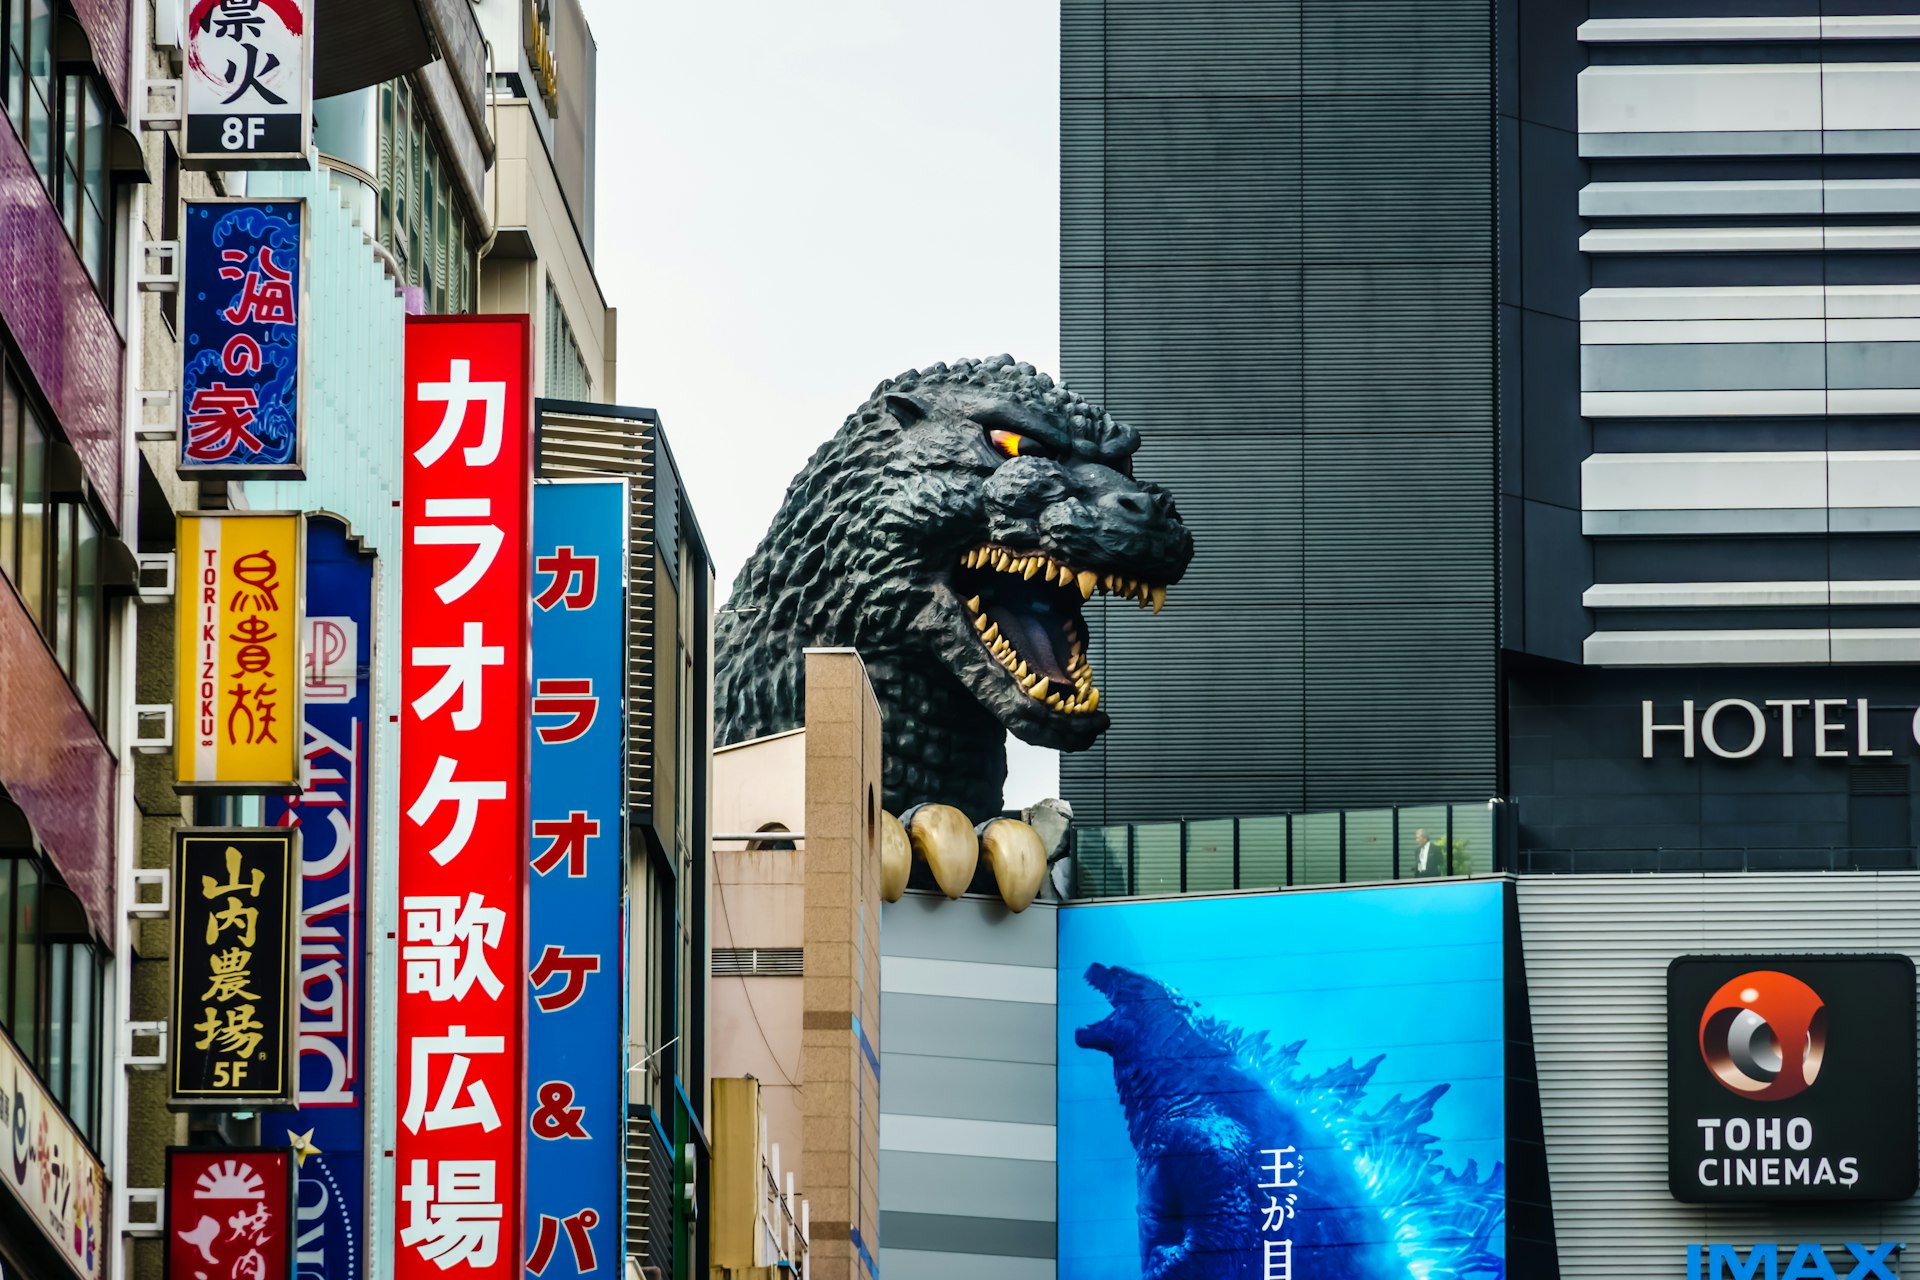 A huge animatronic Godzilla head on top of a building in Shinjuku, Tokyo, with colourful street signs in the foreground